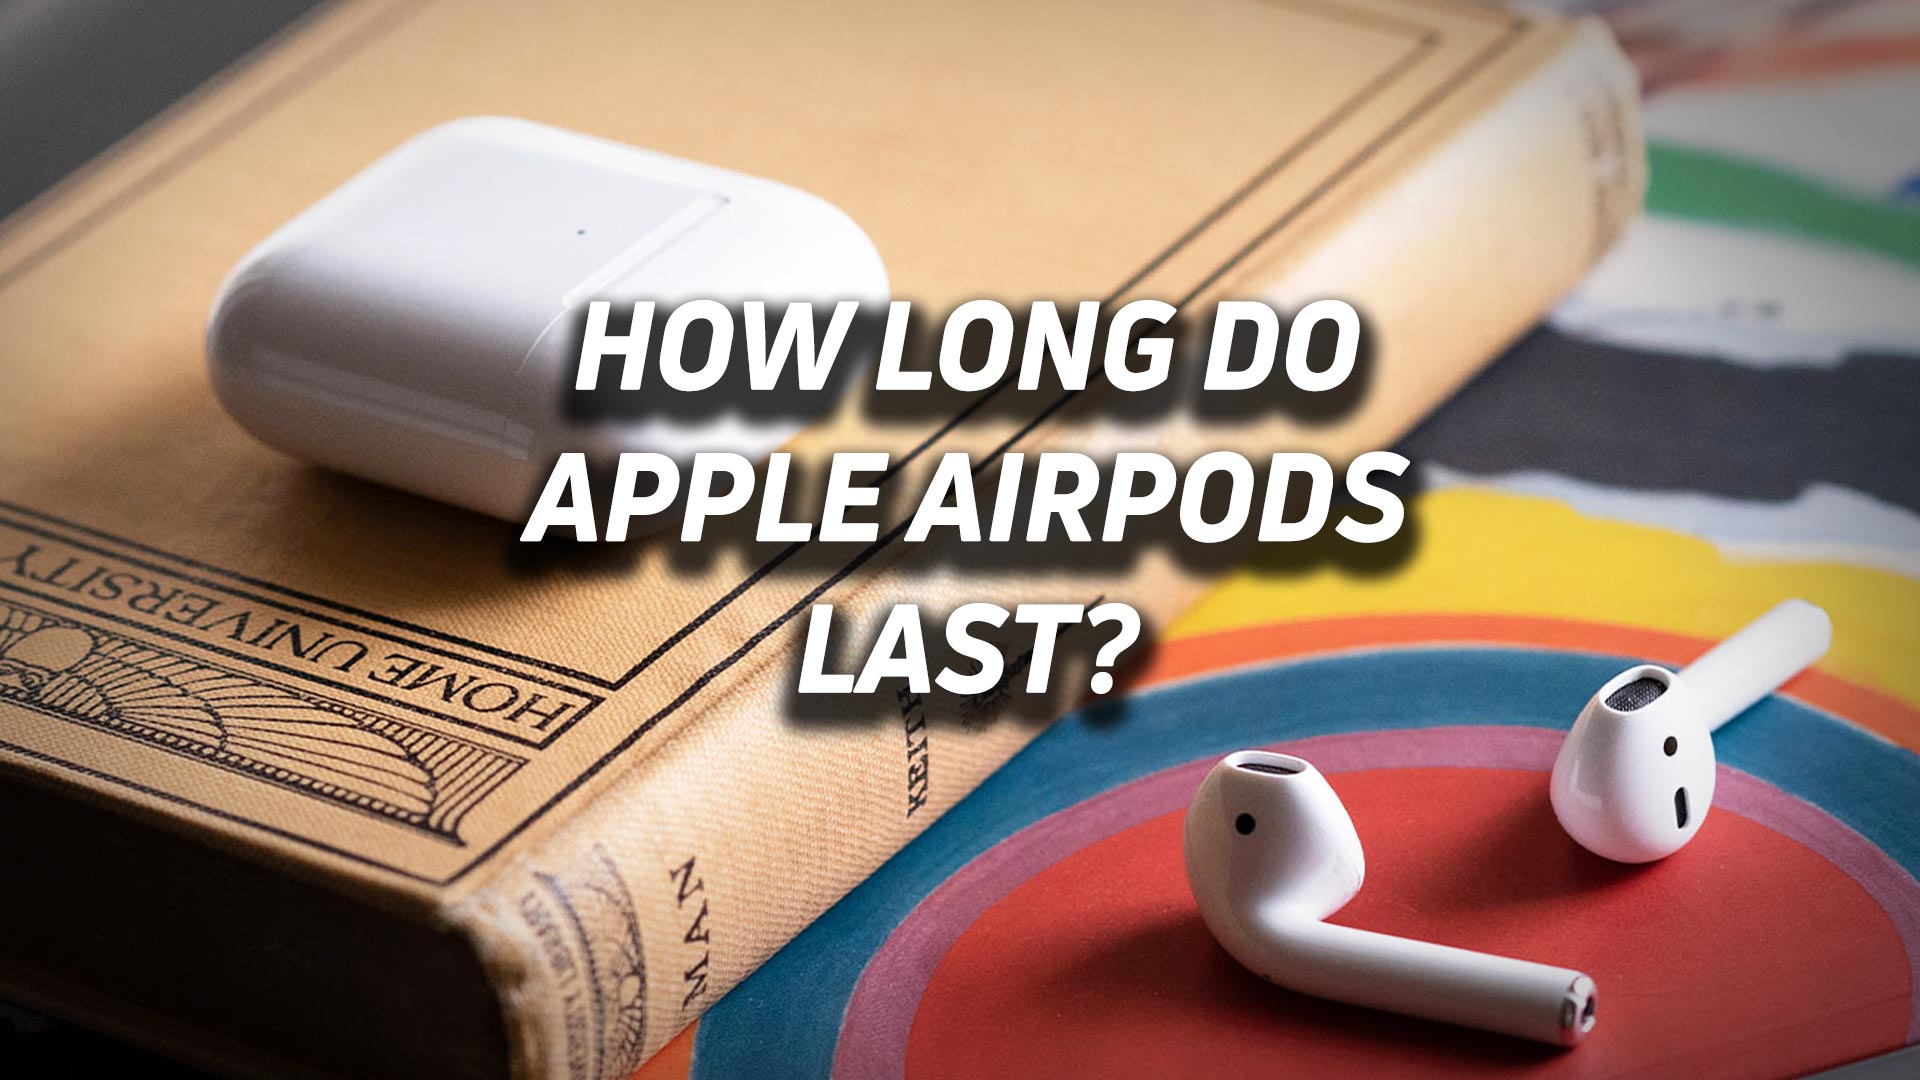 Skuffelse Unravel Panorama AirPods: How long do they last? Can you extend the lifespan? - SoundGuys